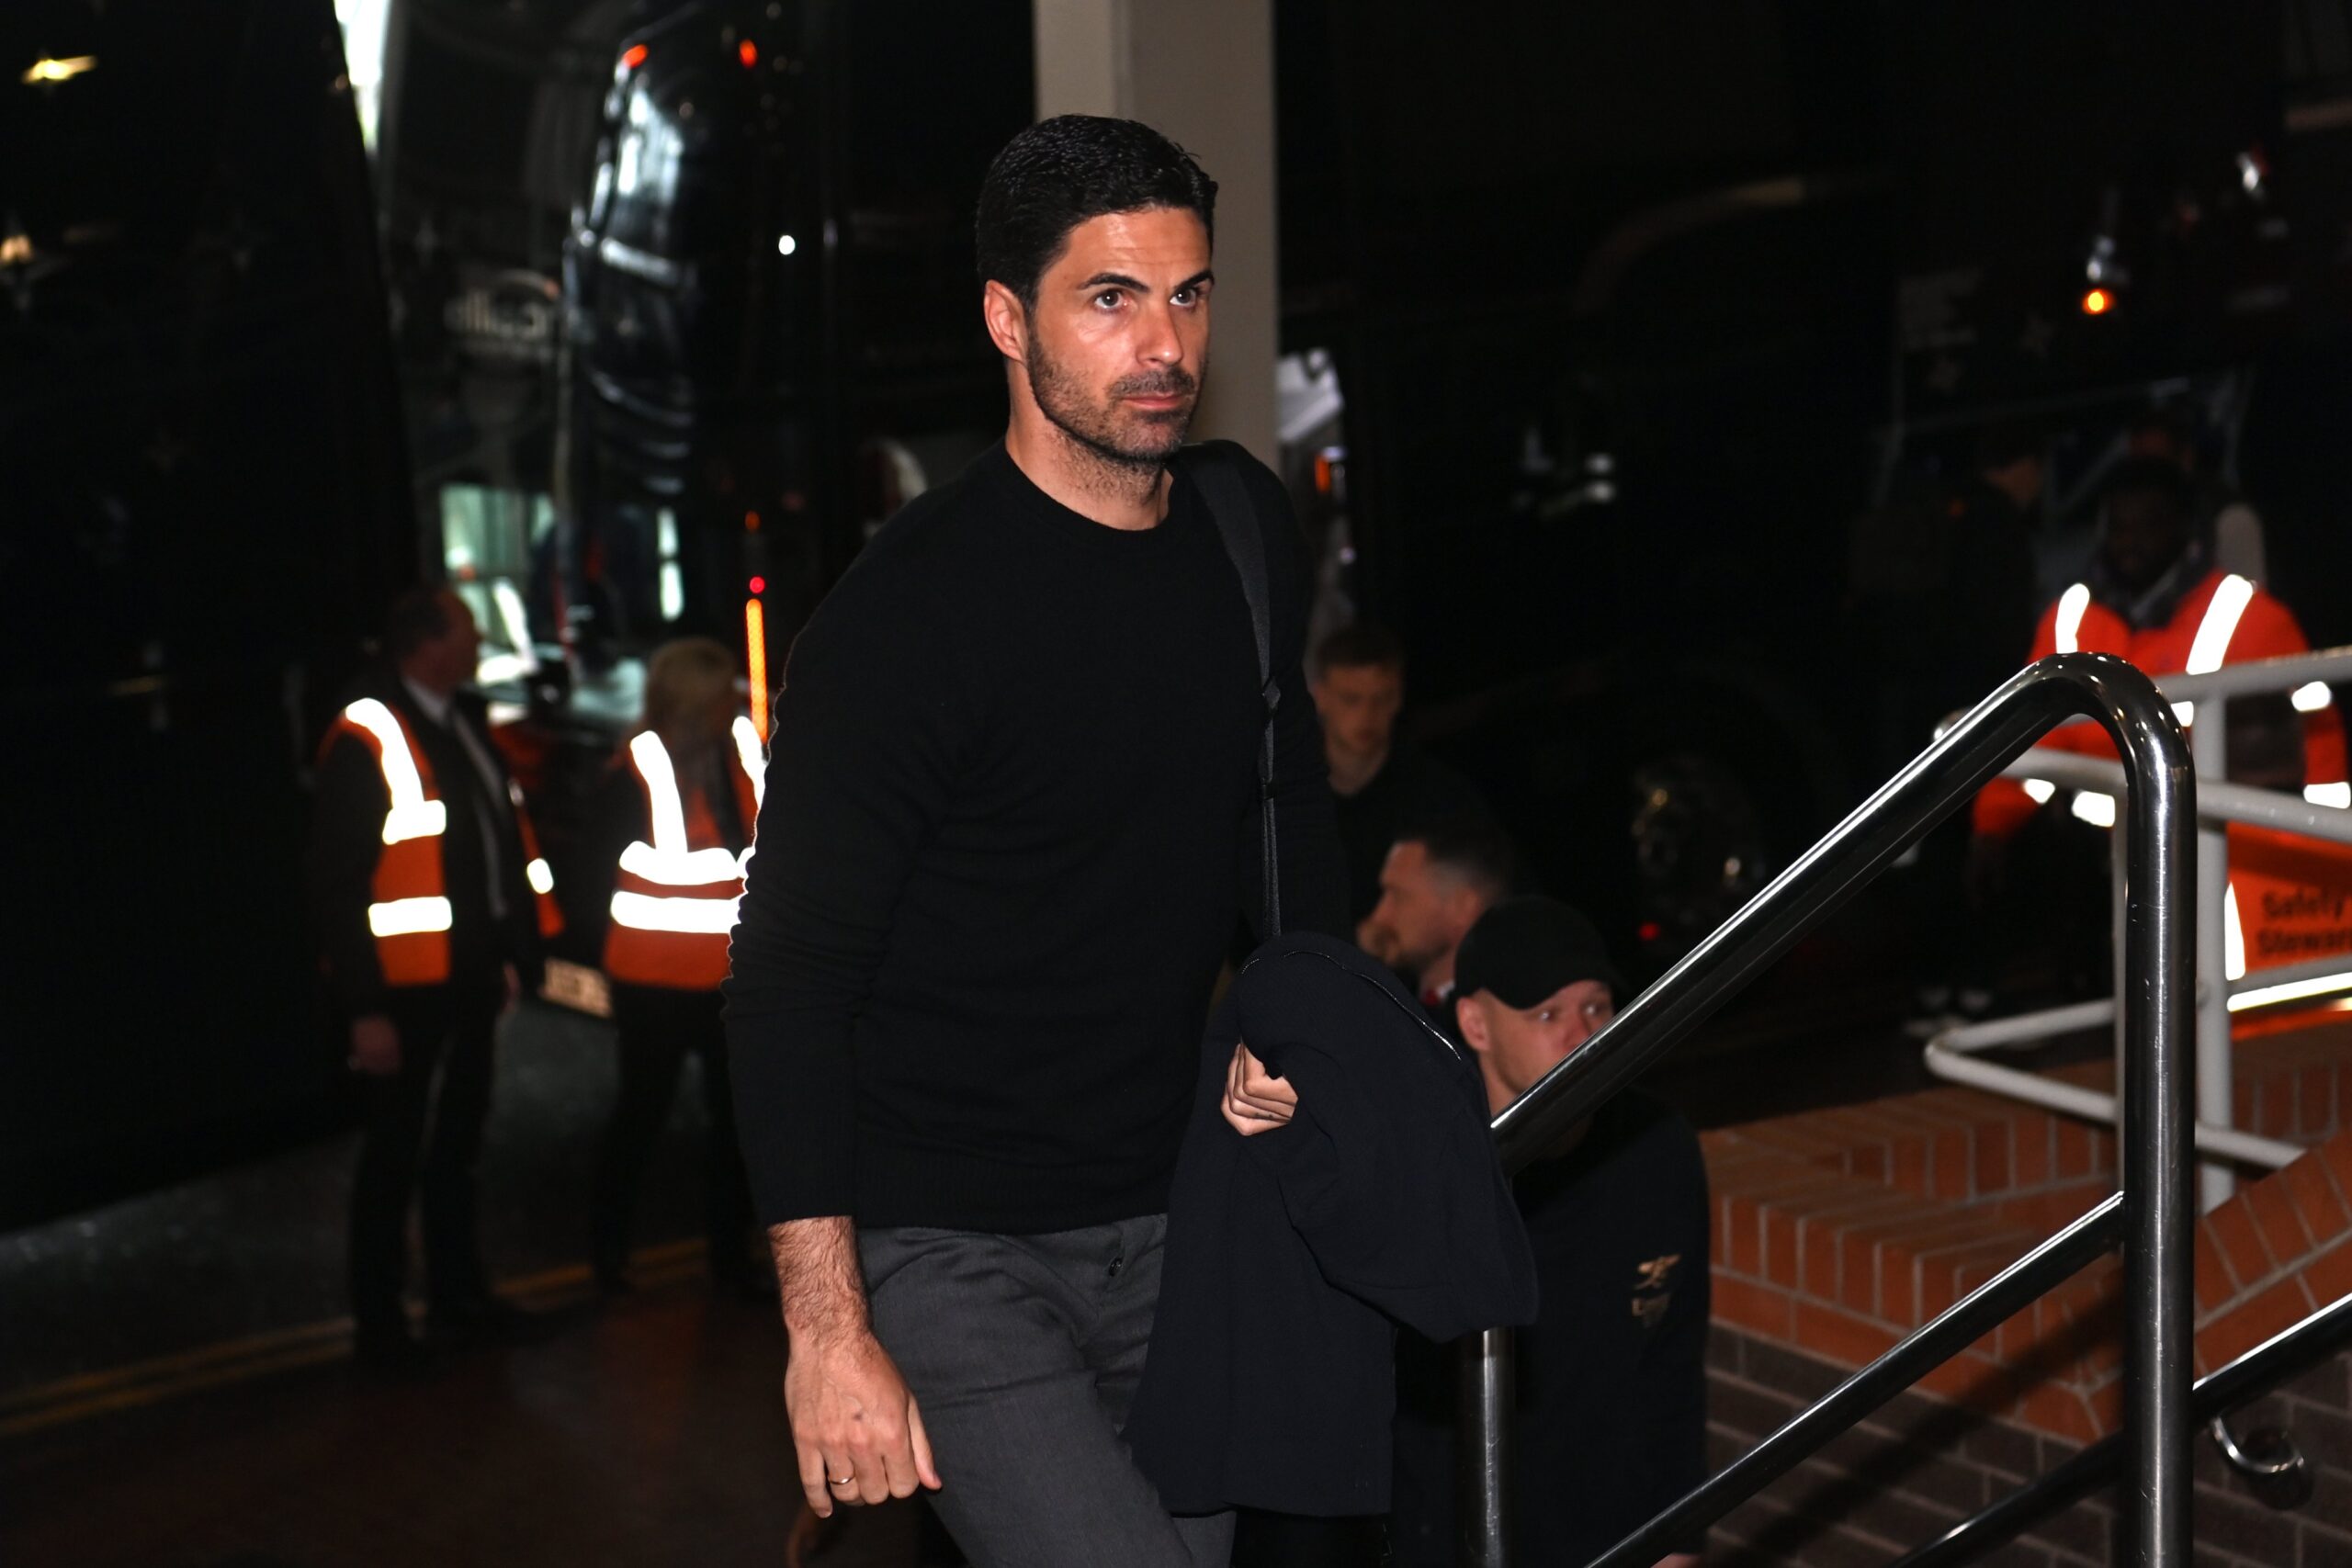 "He Is Not The Player Arteta Likes", Arsenal Player May Soon Leave The Club